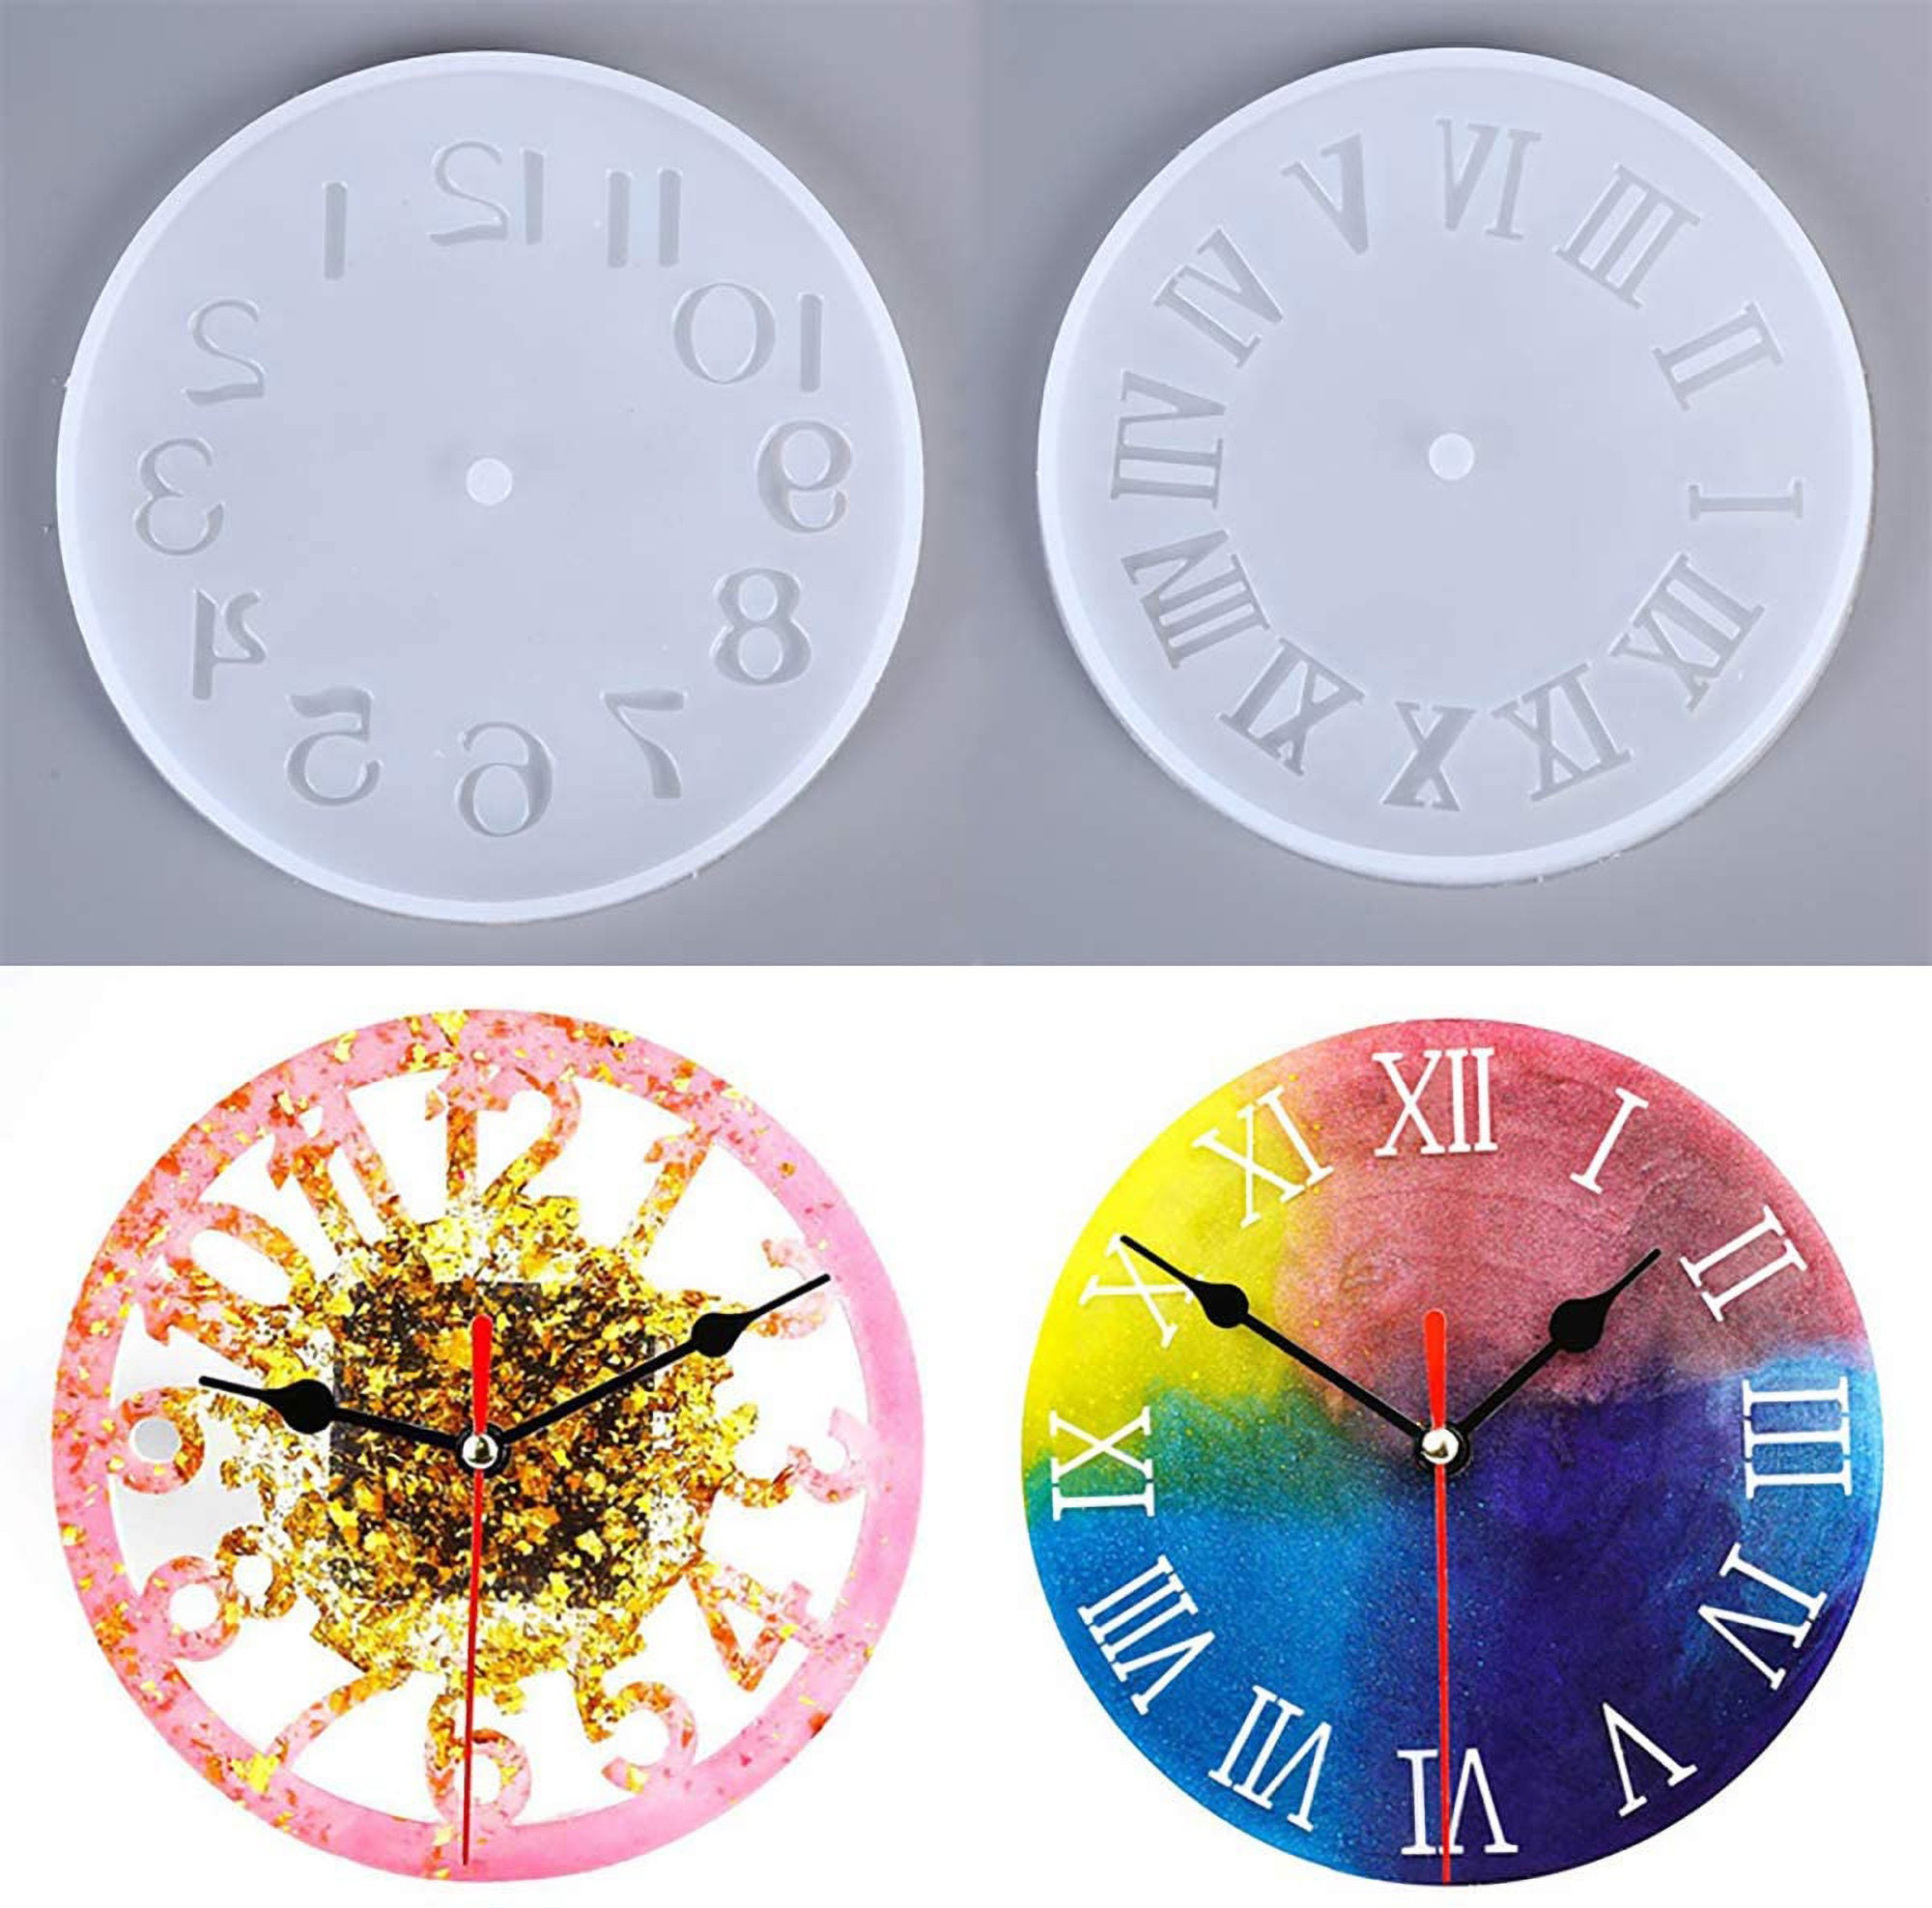 Small Number Clock Mold Resin, Round Clock Silicone Mold, Jewelry